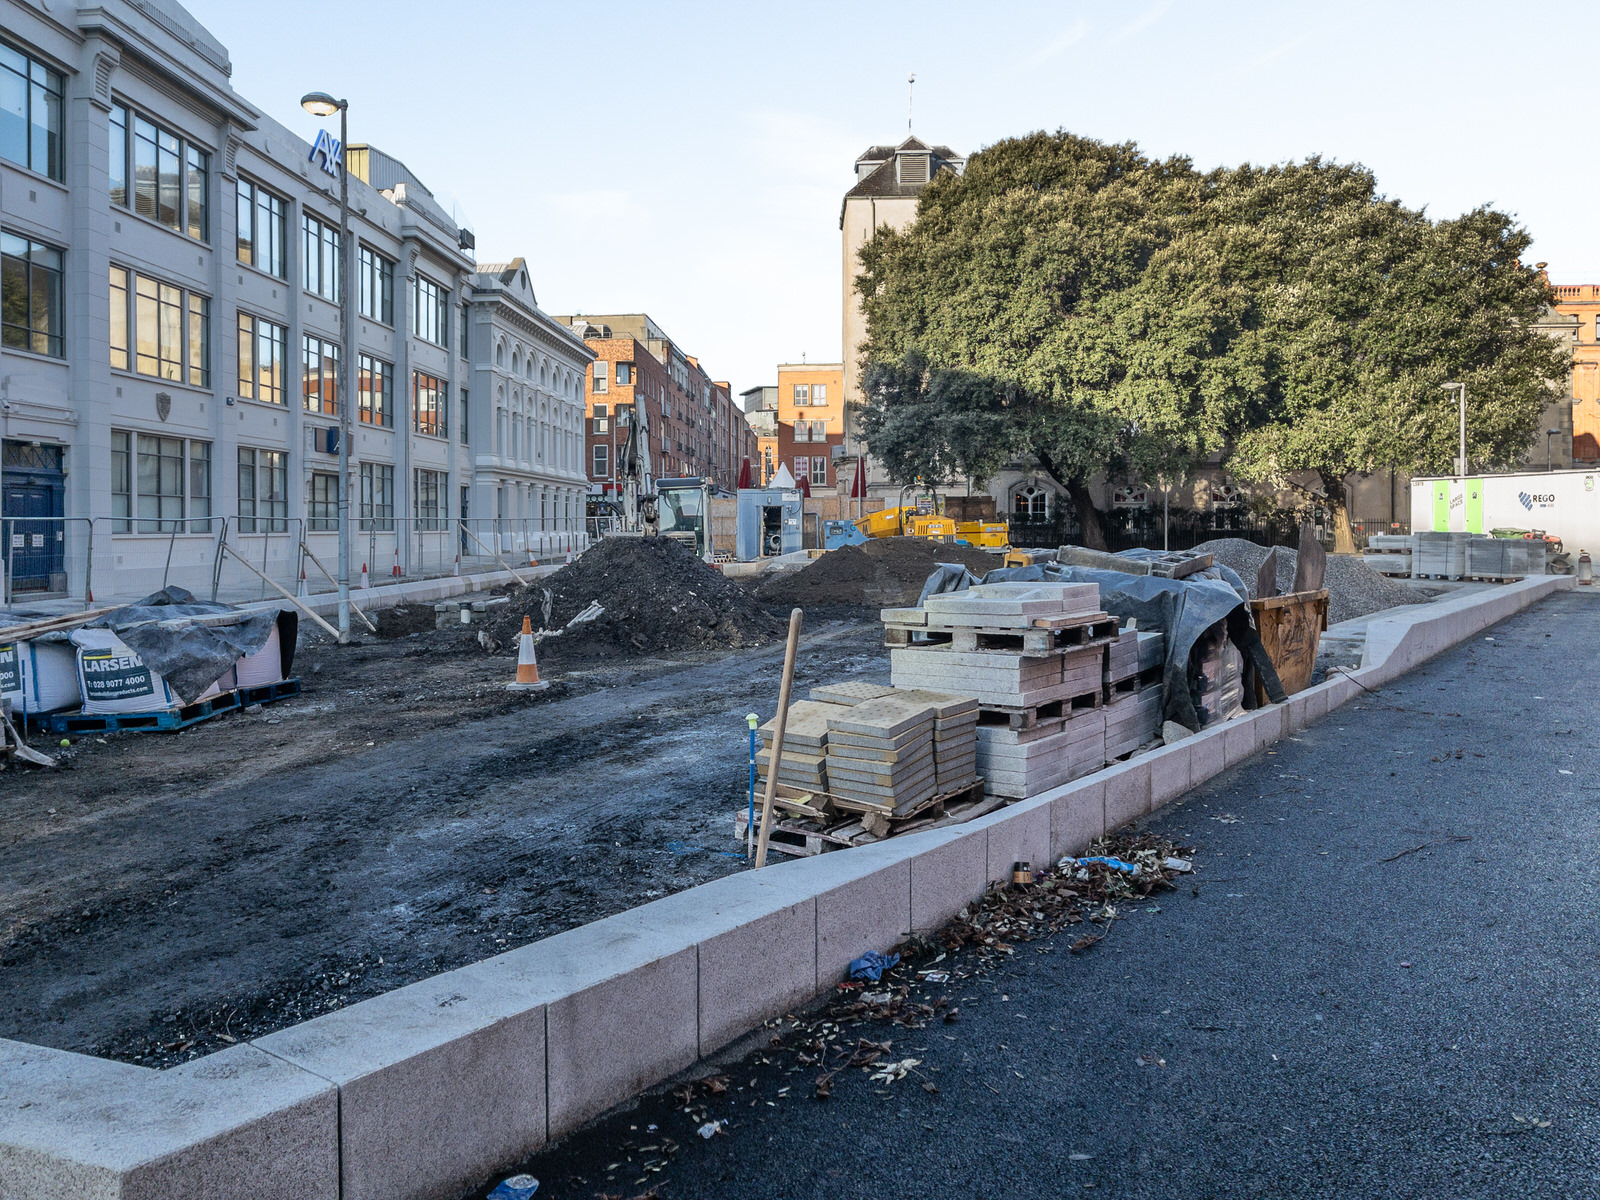 WOLFE TONE STREET AND PARK - ENVIRONMENTAL IMPROVEMENT PROJECT